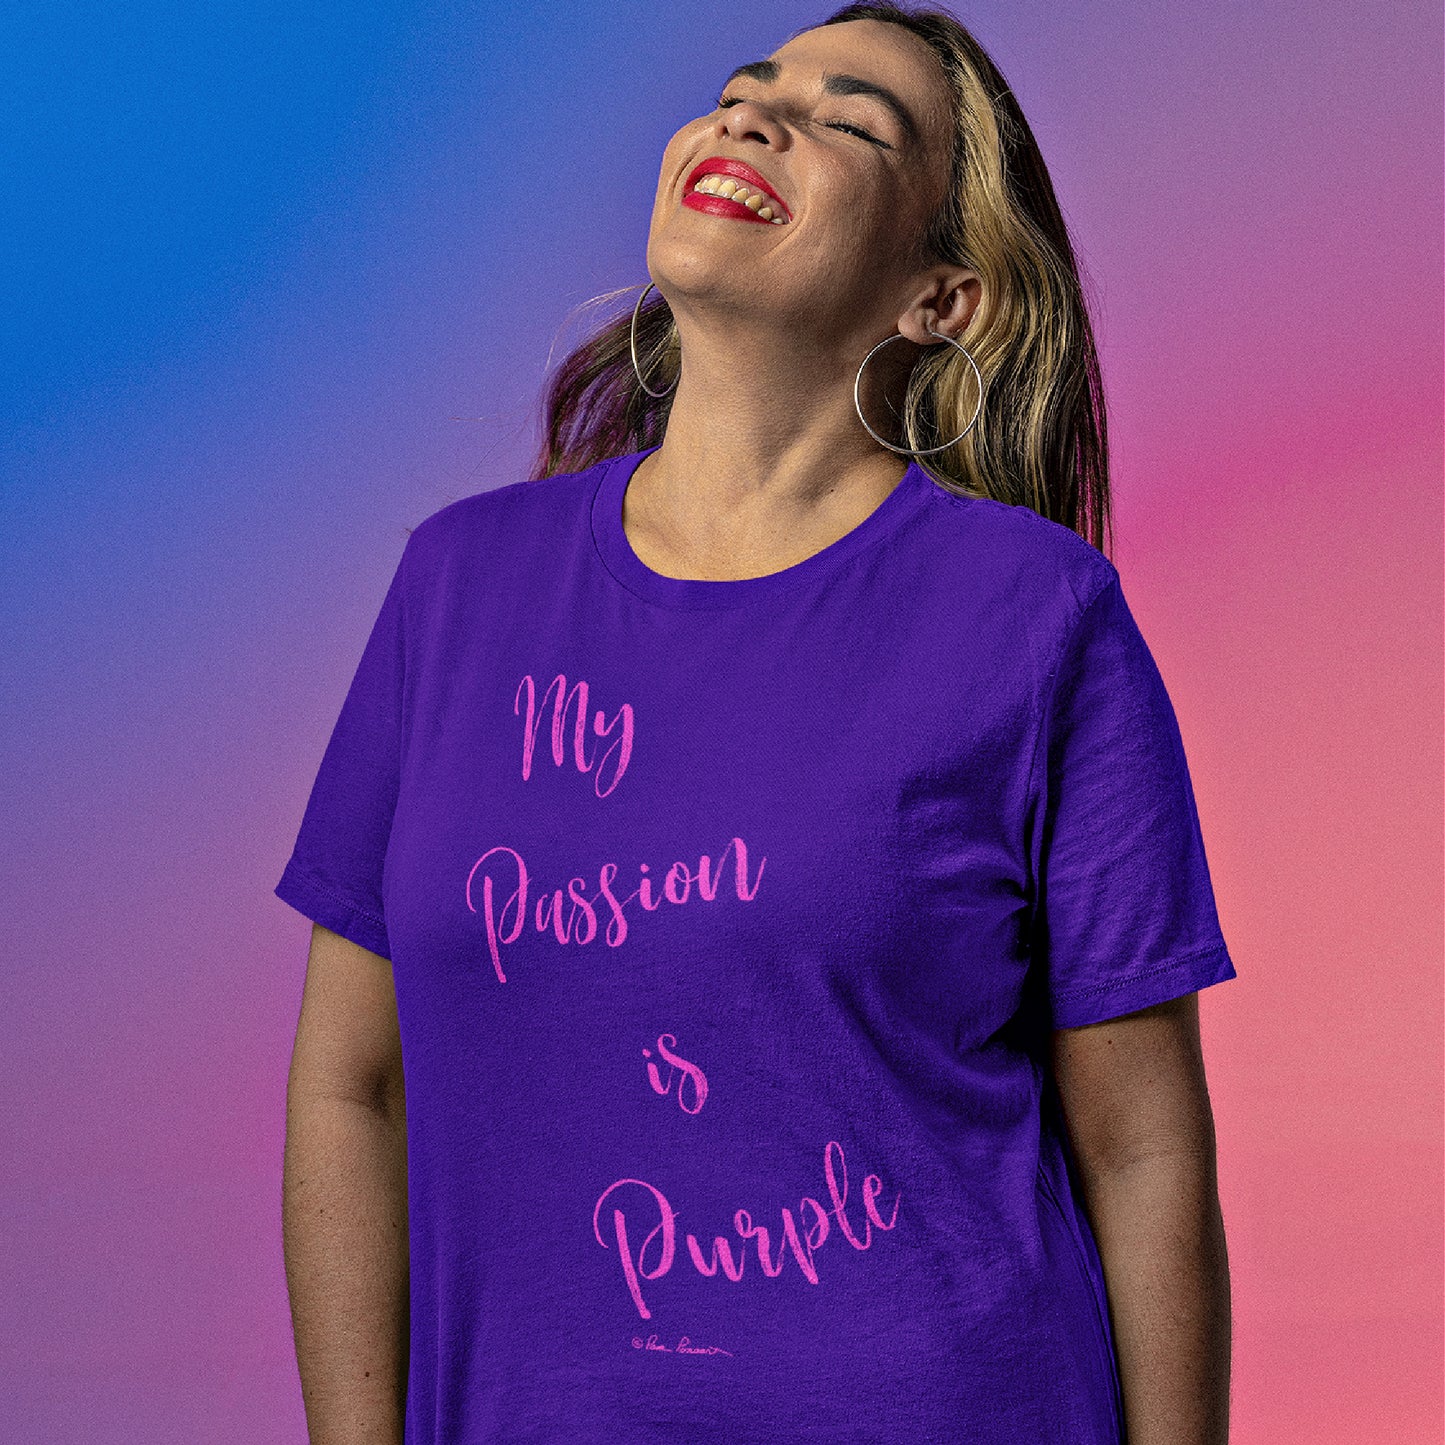 Mock up of a woman wearing our Purple-Passion T-shirt